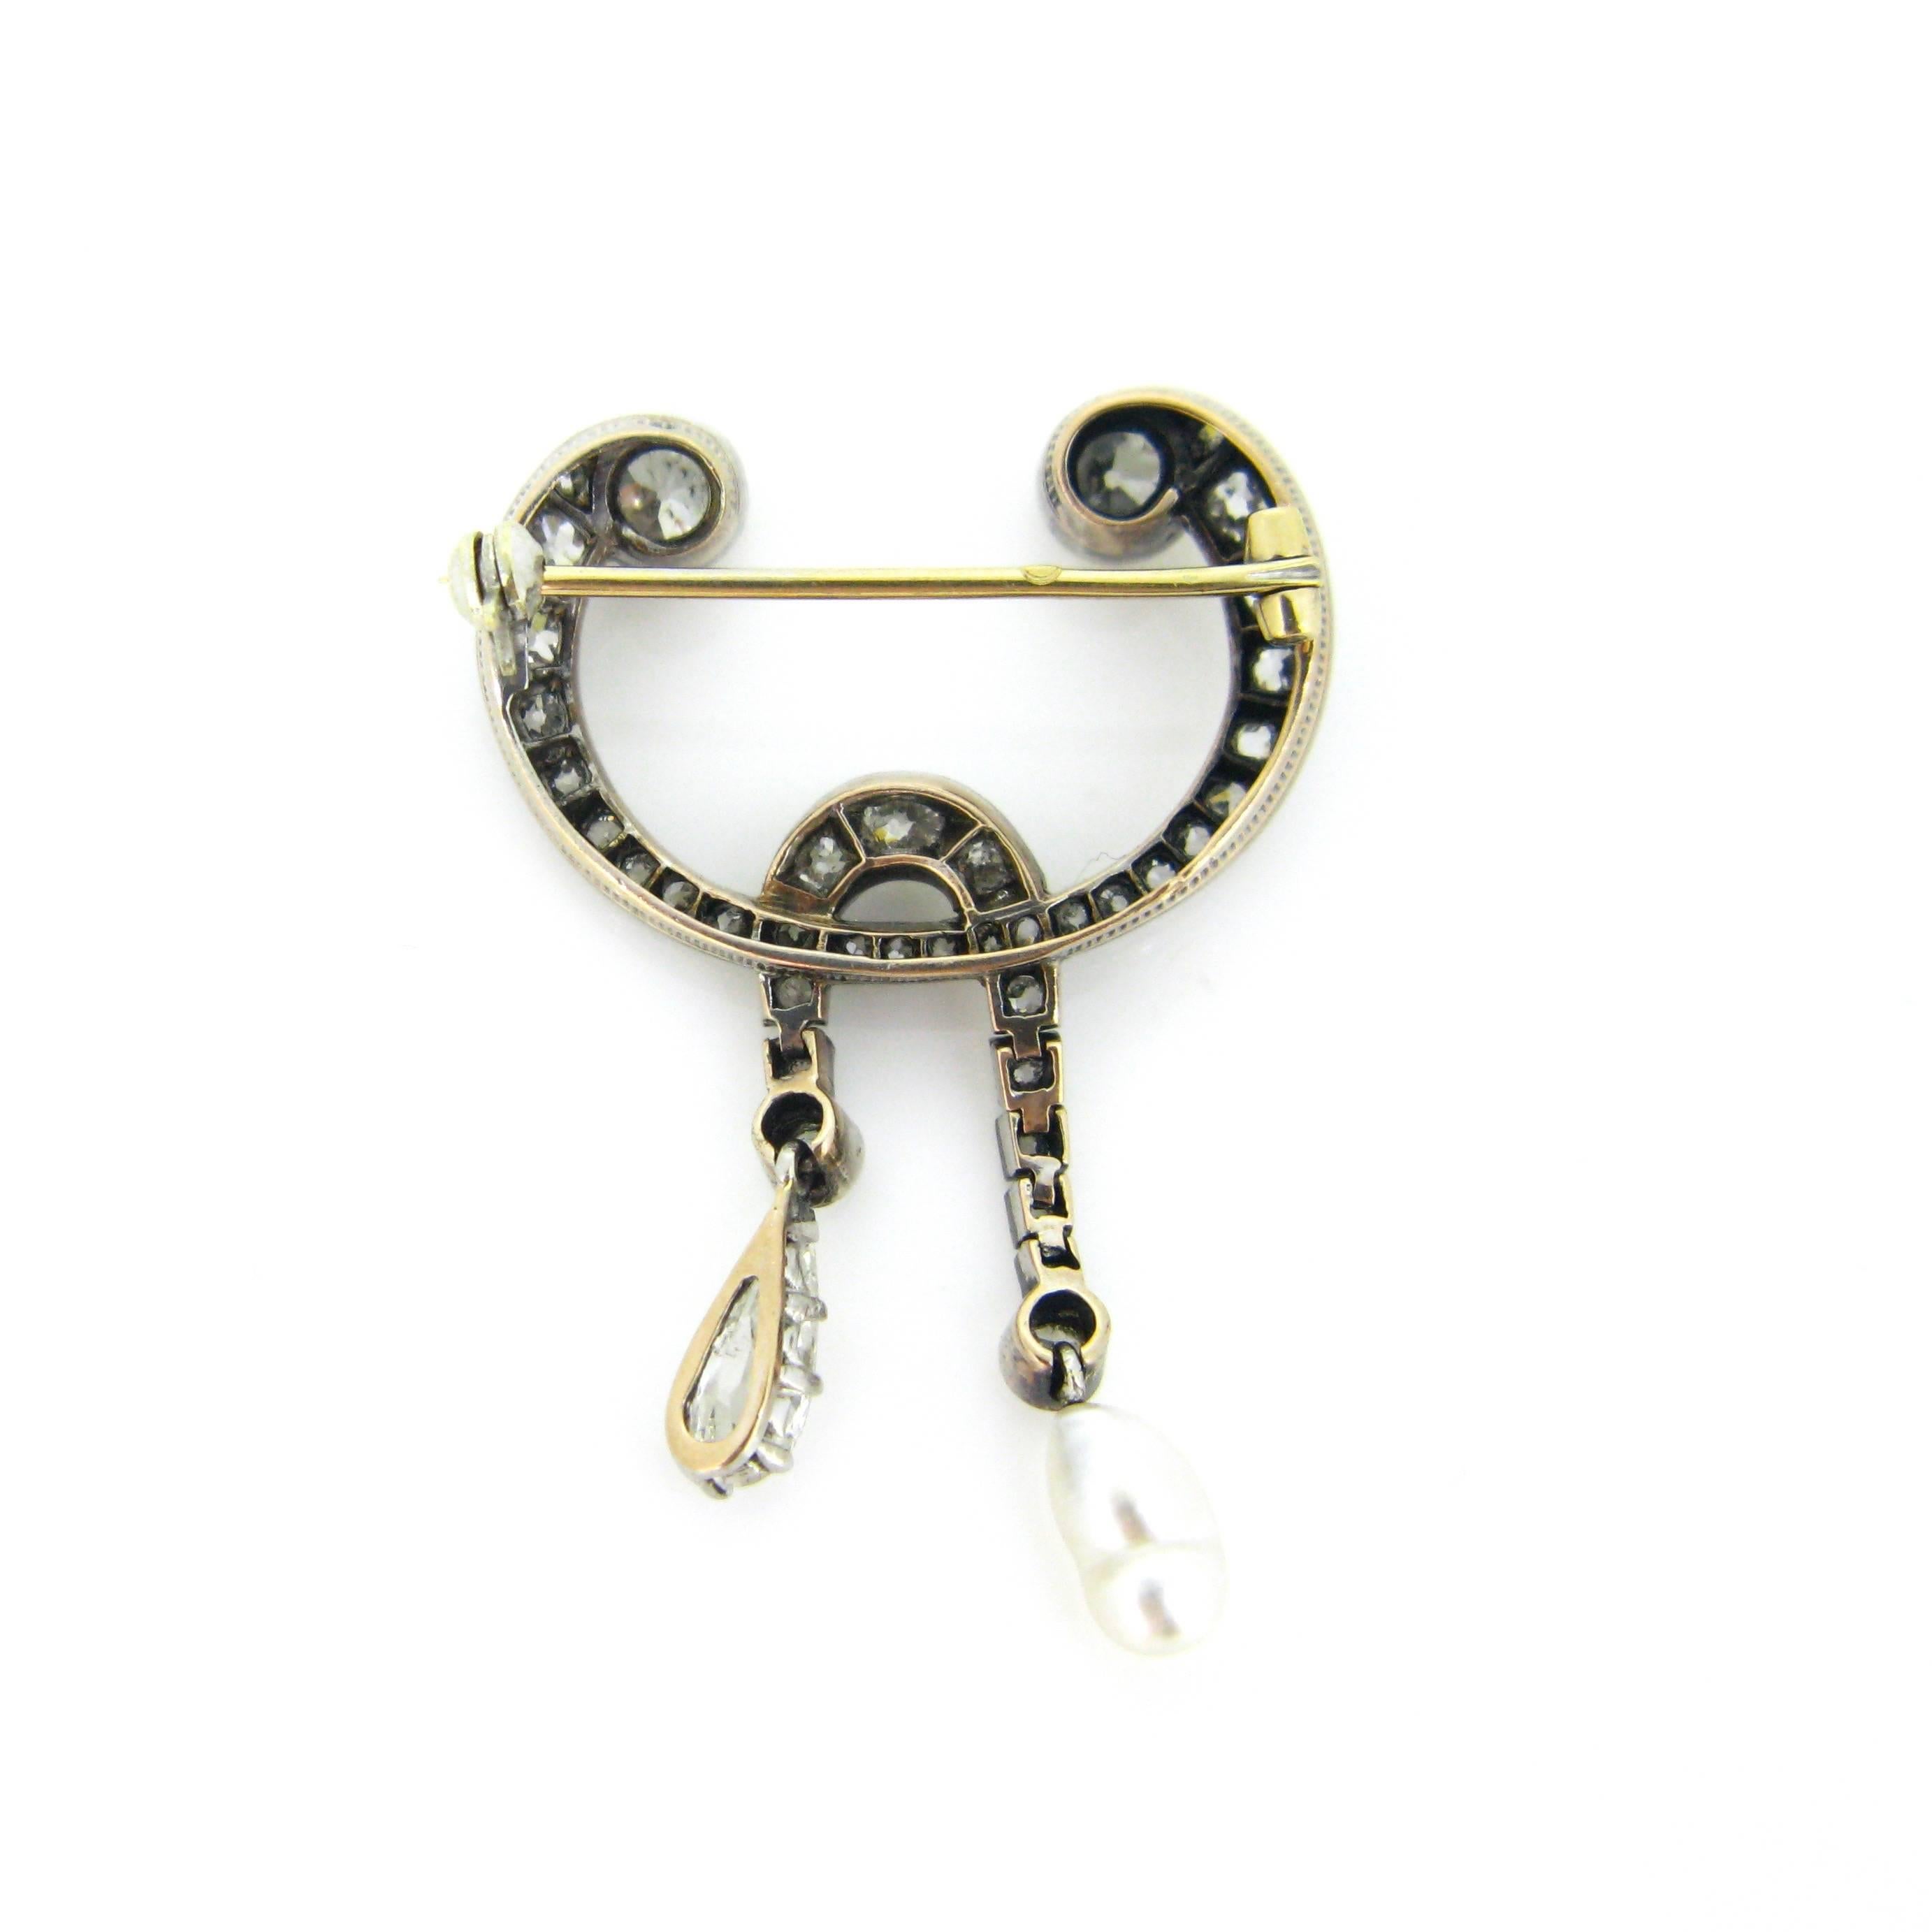 A ravishing and very unique brooch. This one has wonderful curving shapes. It features two sparkling old mine cut diamonds on the top and it ends on 2 dangling parts : on one side we have a natural baroque pearl and on the other side we have a